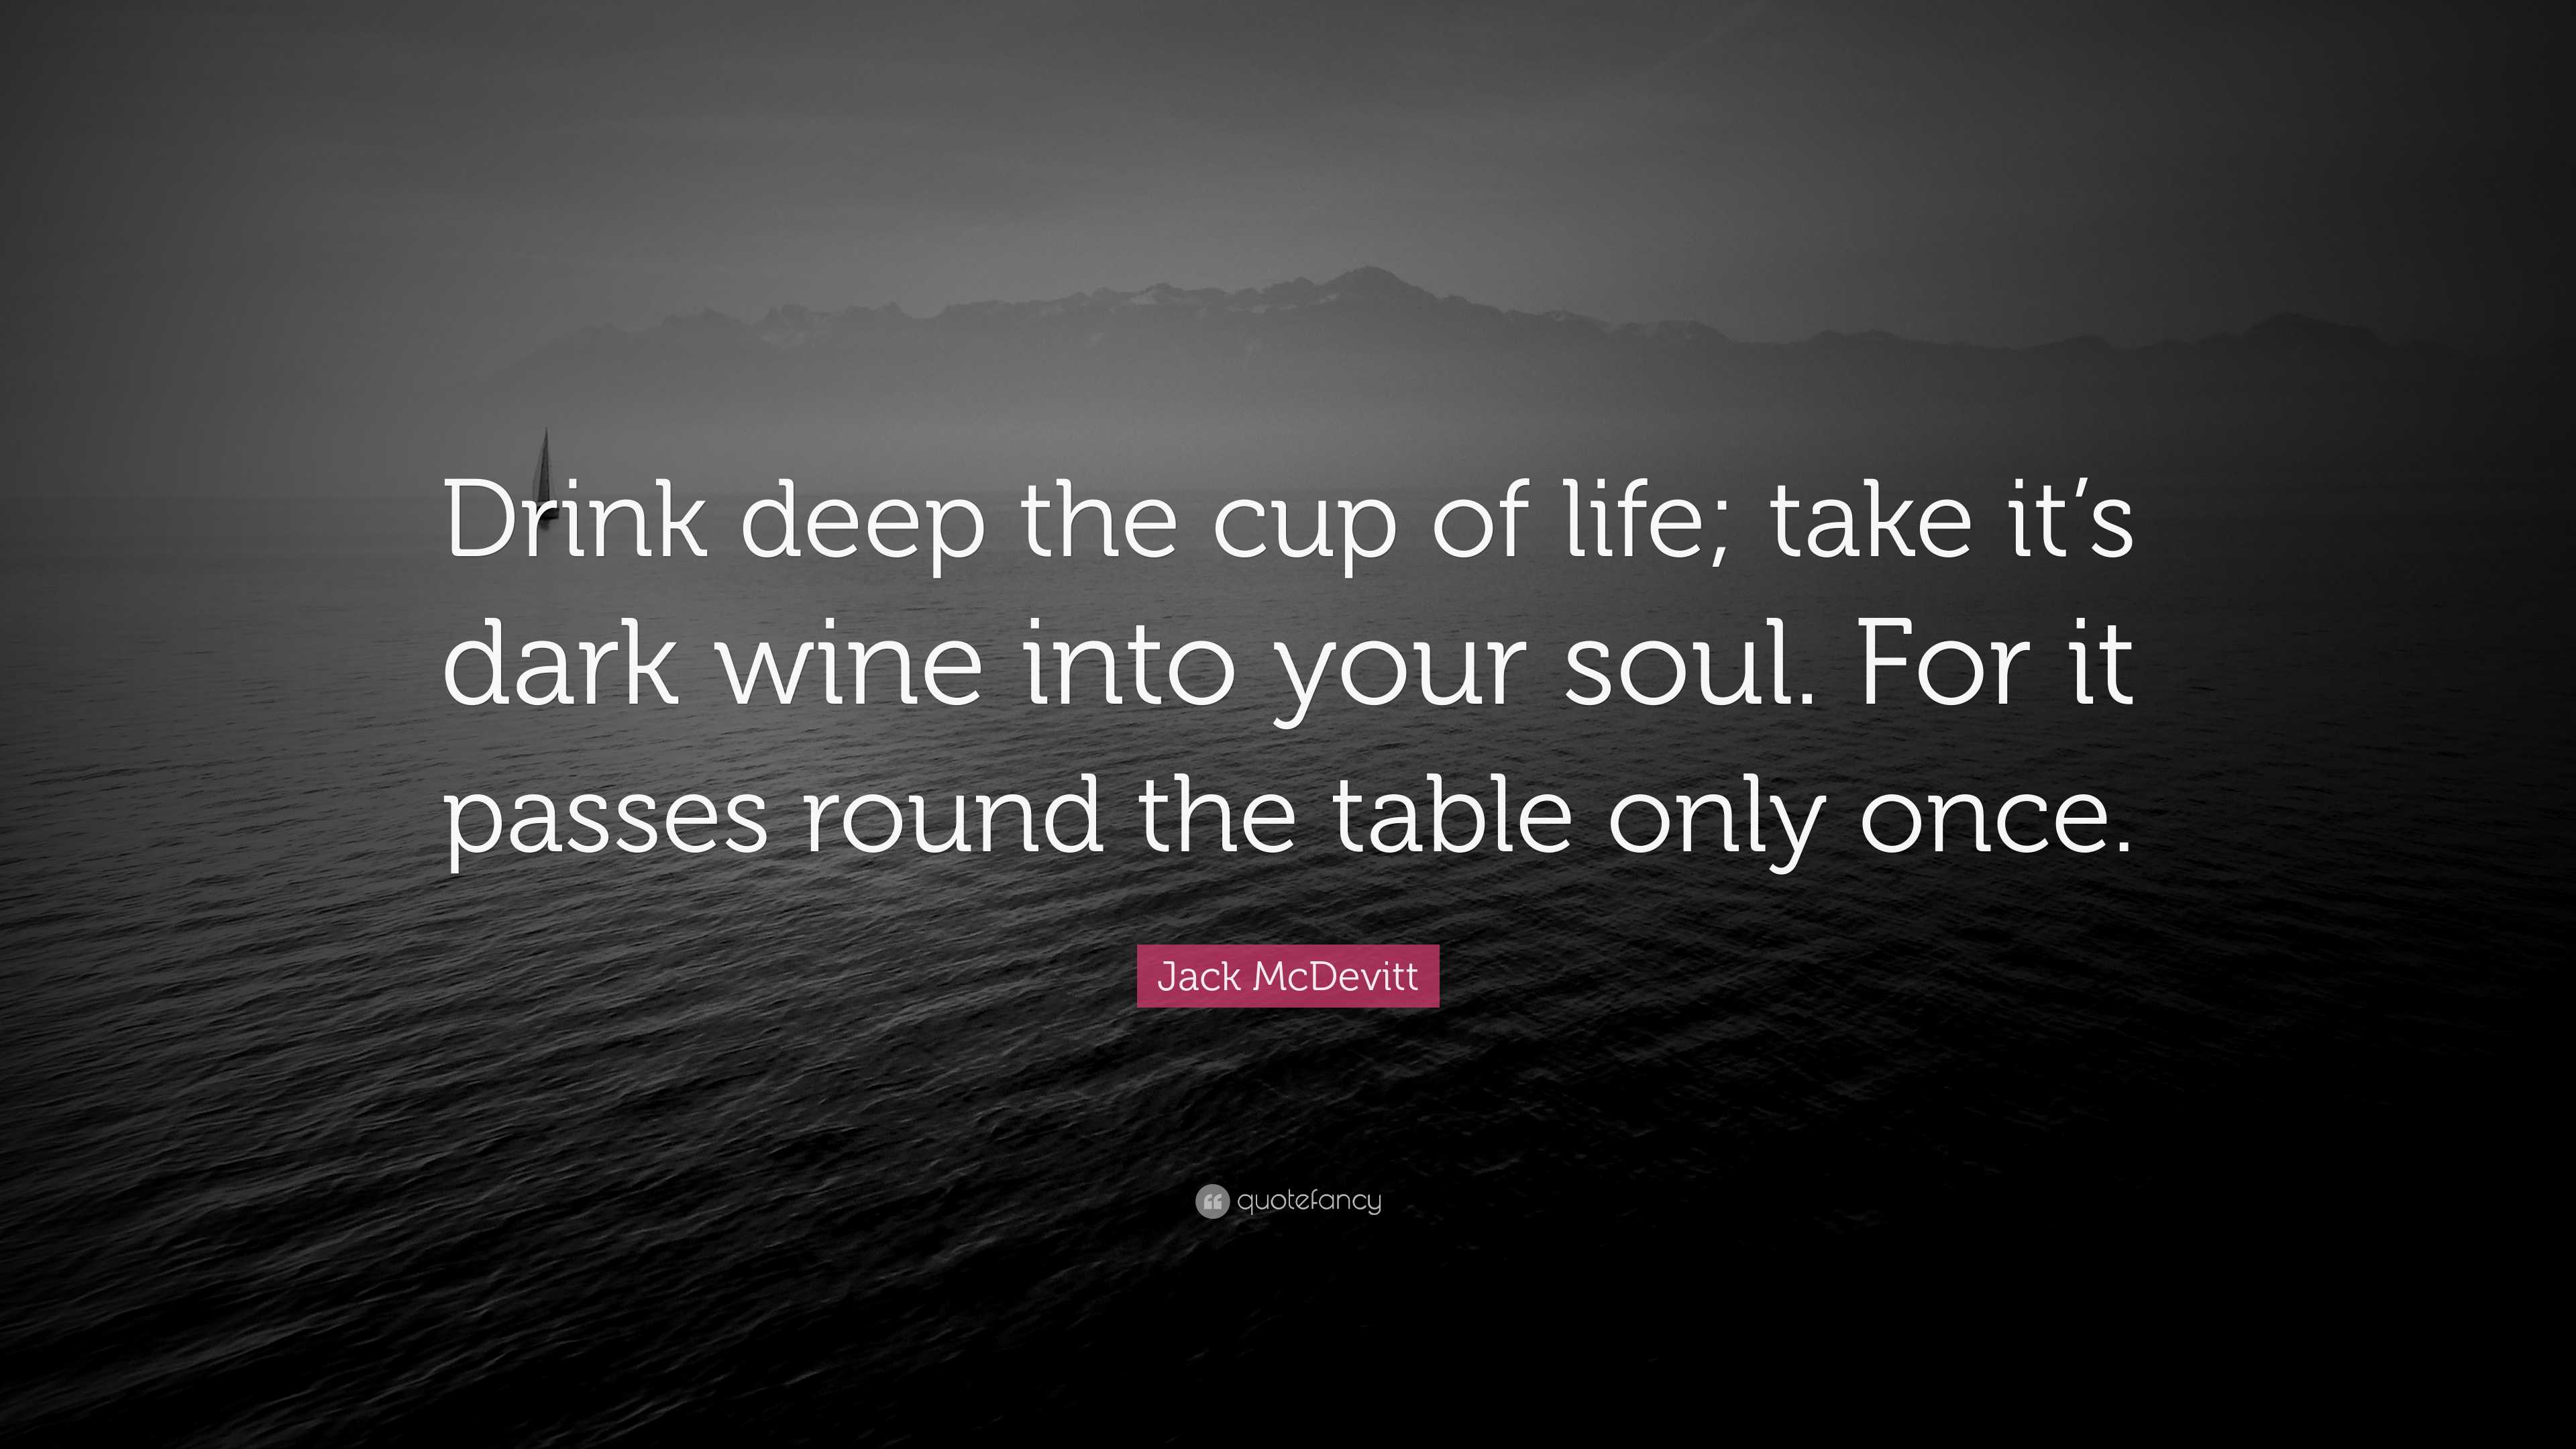 Jack McDevitt Quote: “Drink deep the cup of life; take it's dark wine into  your soul.